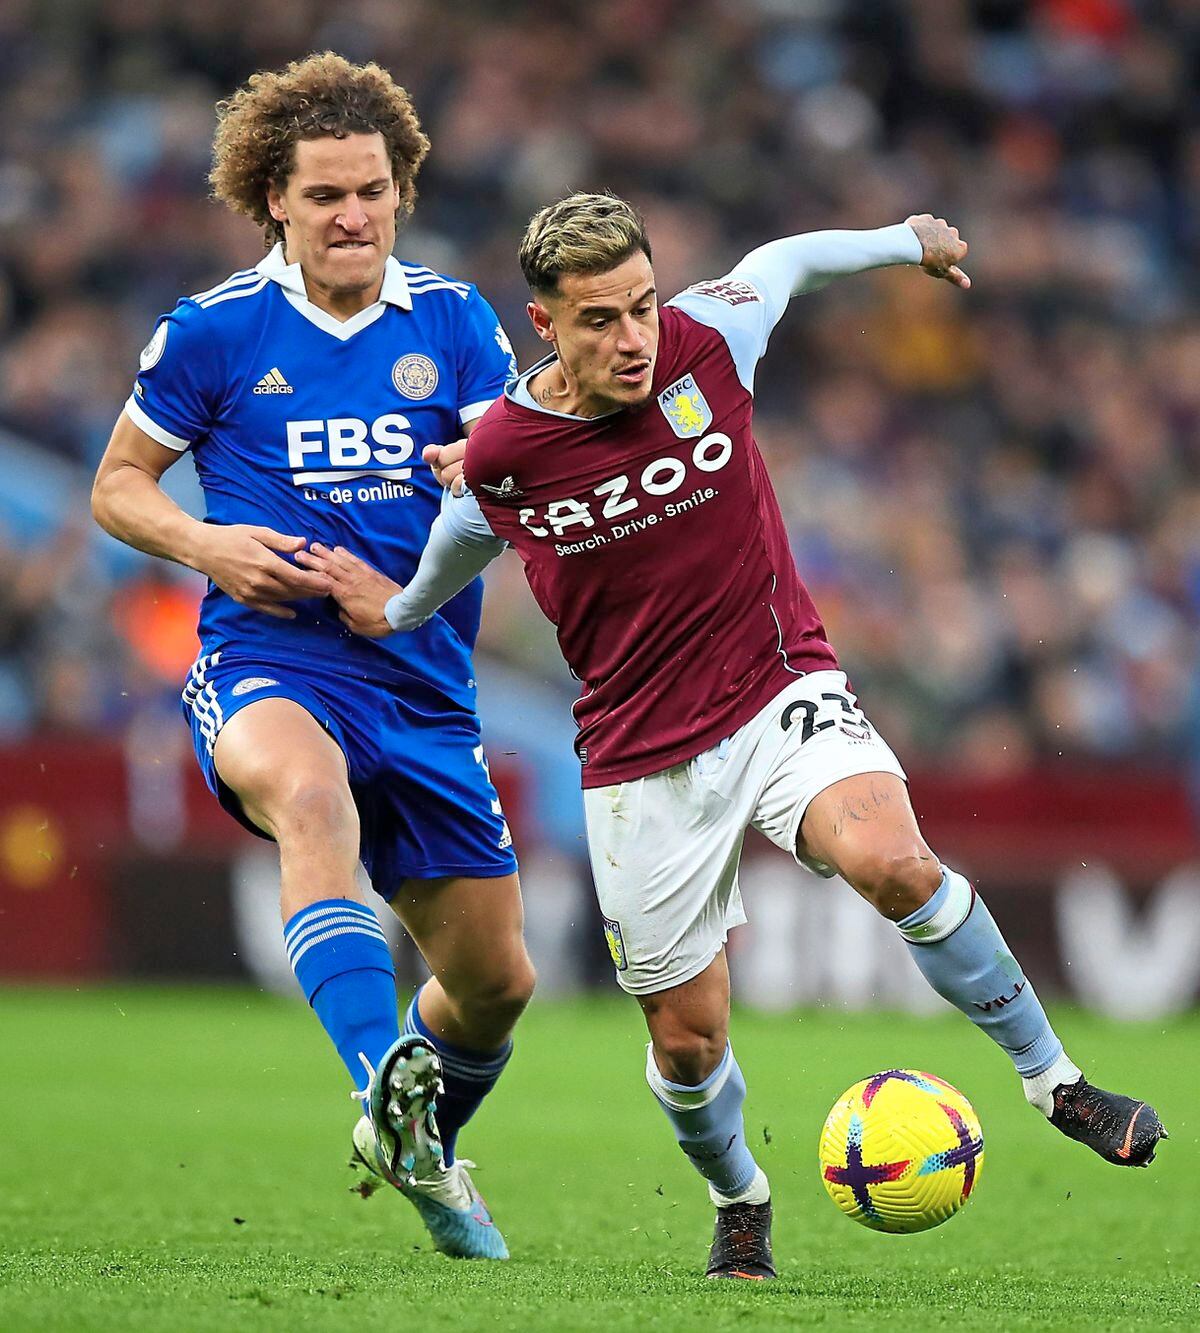 
              
Leicester City's Wout Faes (left) and Aston Villa's Philippe Coutinho (right) battle for the ball during the Premier League match at Villa Park, Birmingham. Picture date: Saturday February 4, 2023. PA Photo. See PA story SOCCER Villa. Photo credit should read: Isaac Parkin/PA Wire.


RESTRICTIONS: EDITORIAL USE ONLY No use with unauthorised audio, 
video, data, fixture lists, club/league logos or "live" services. Online in-match use limited to 120 images, no video emulation. No use in betting, games or single club/league/player publications.
            
